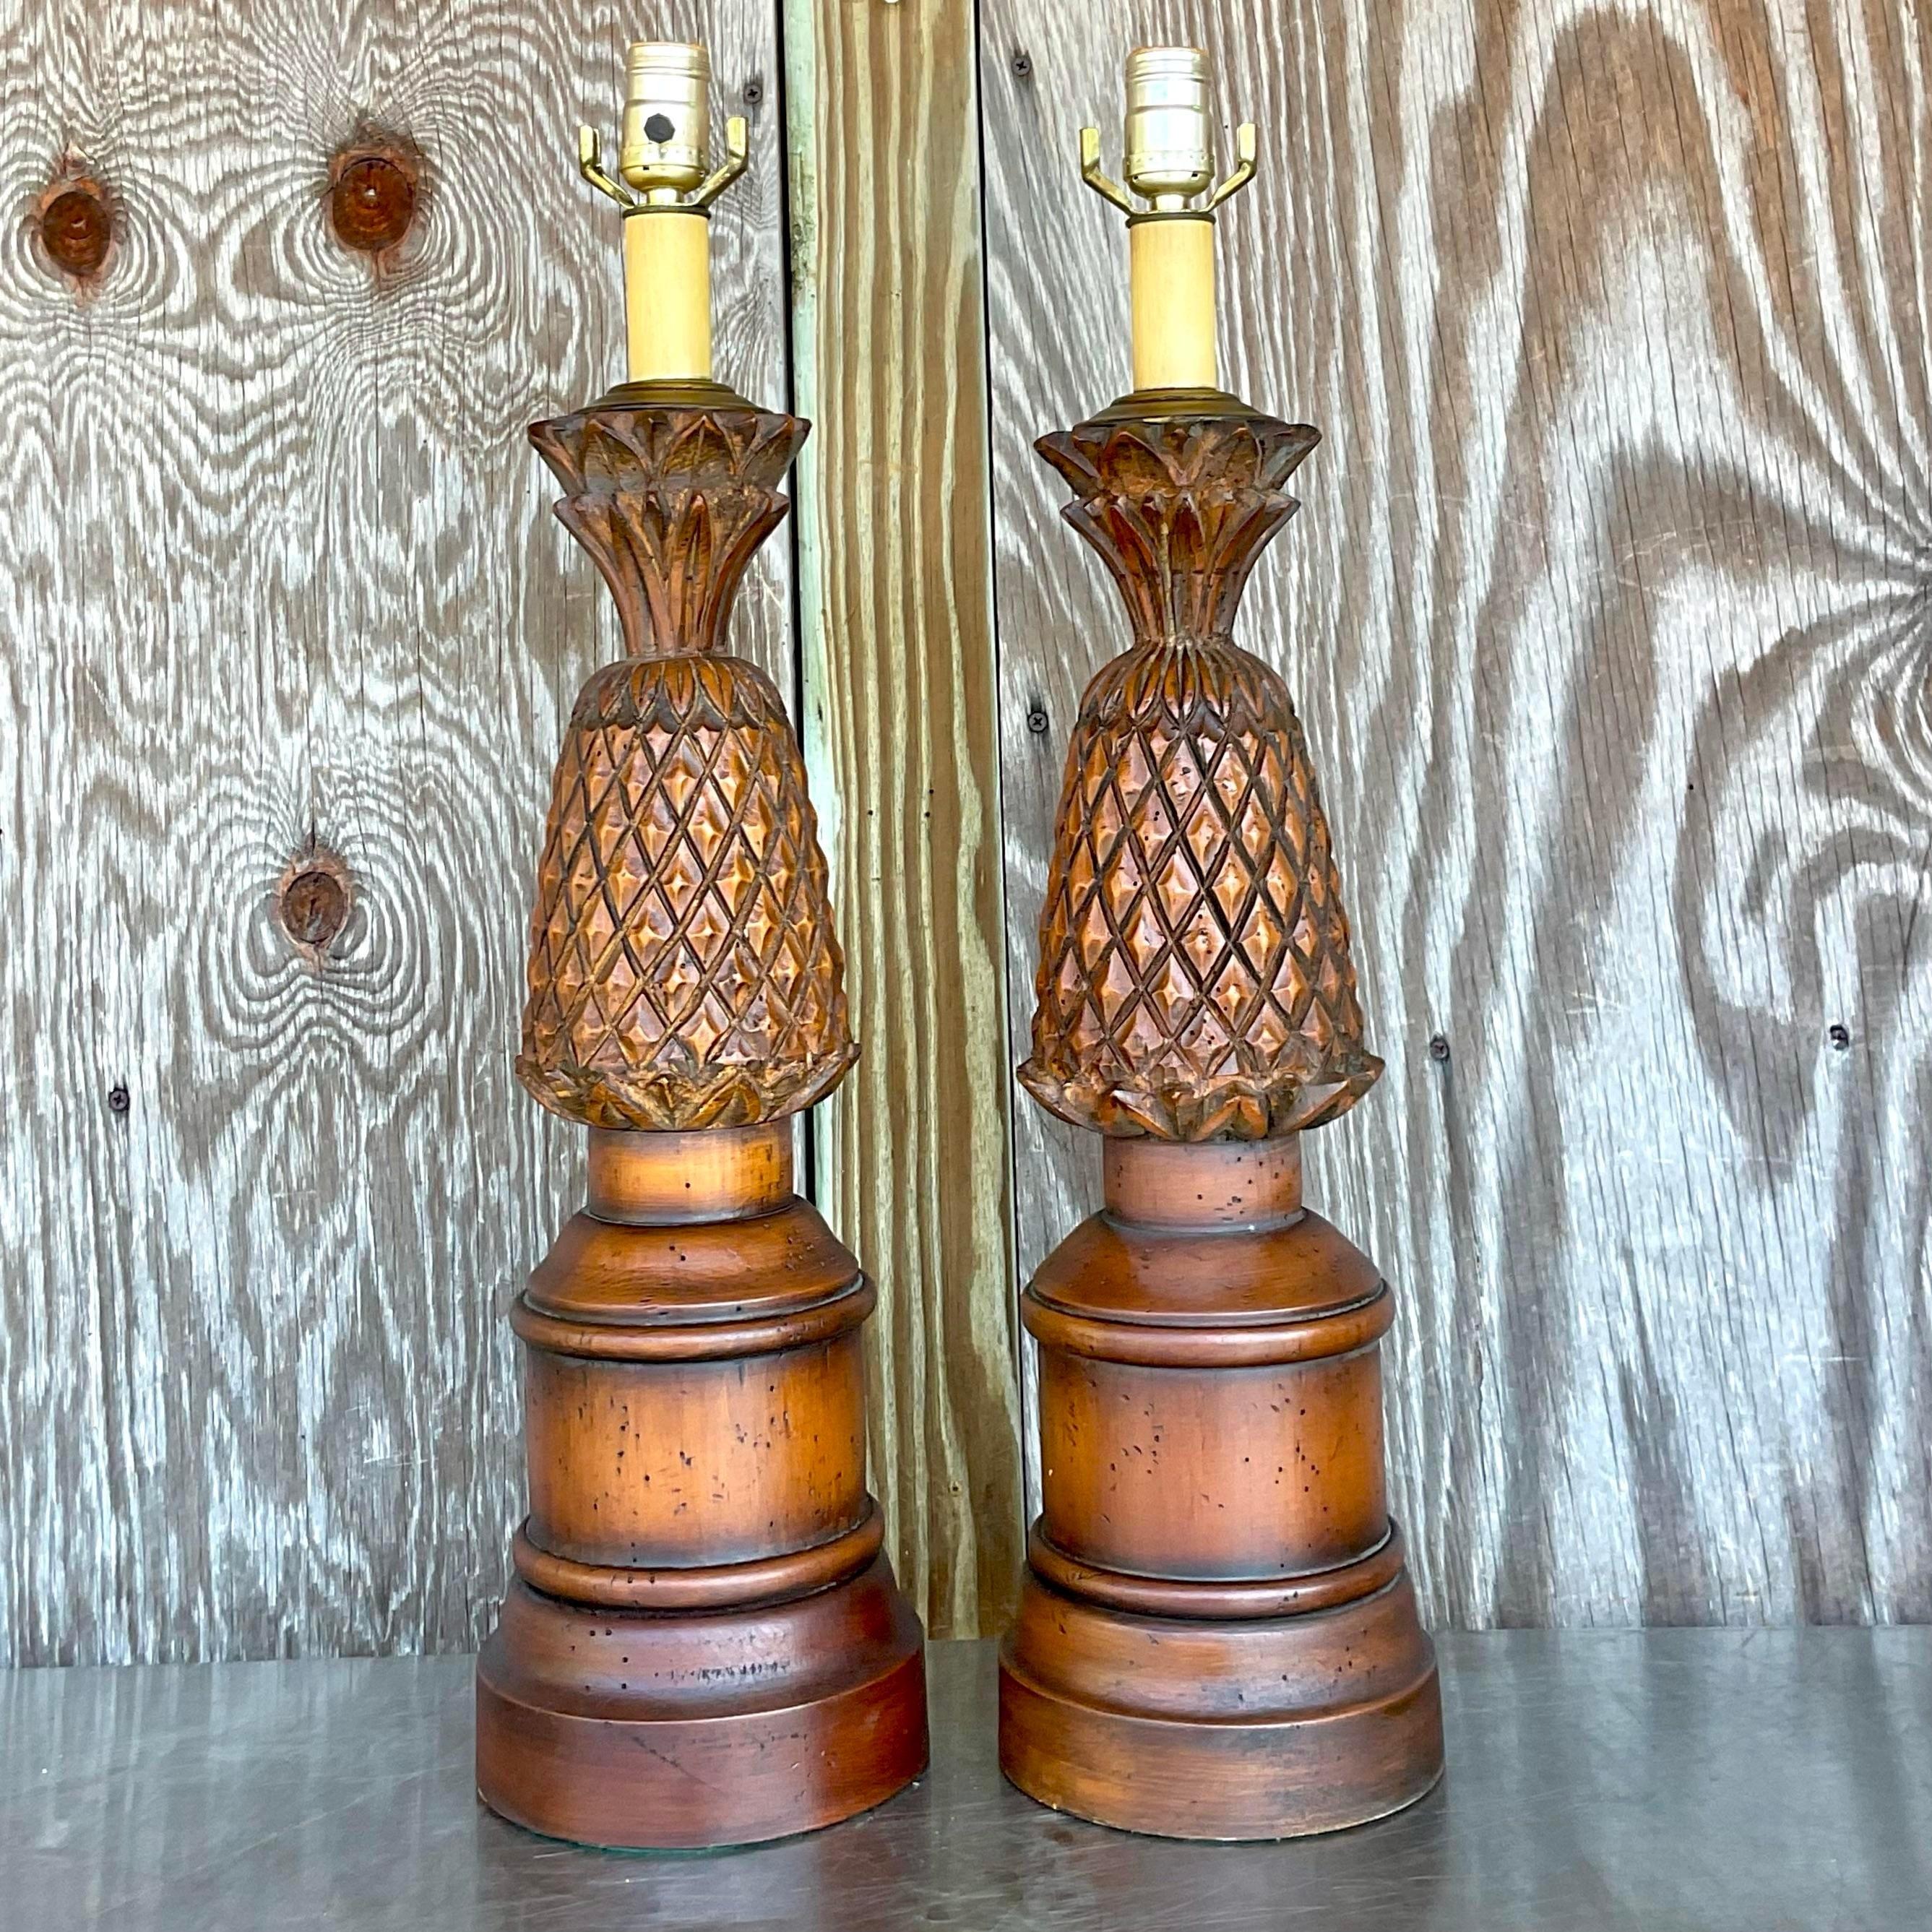 American Vintage Boho Hand Carved Pineapple Lamps - a Pair For Sale